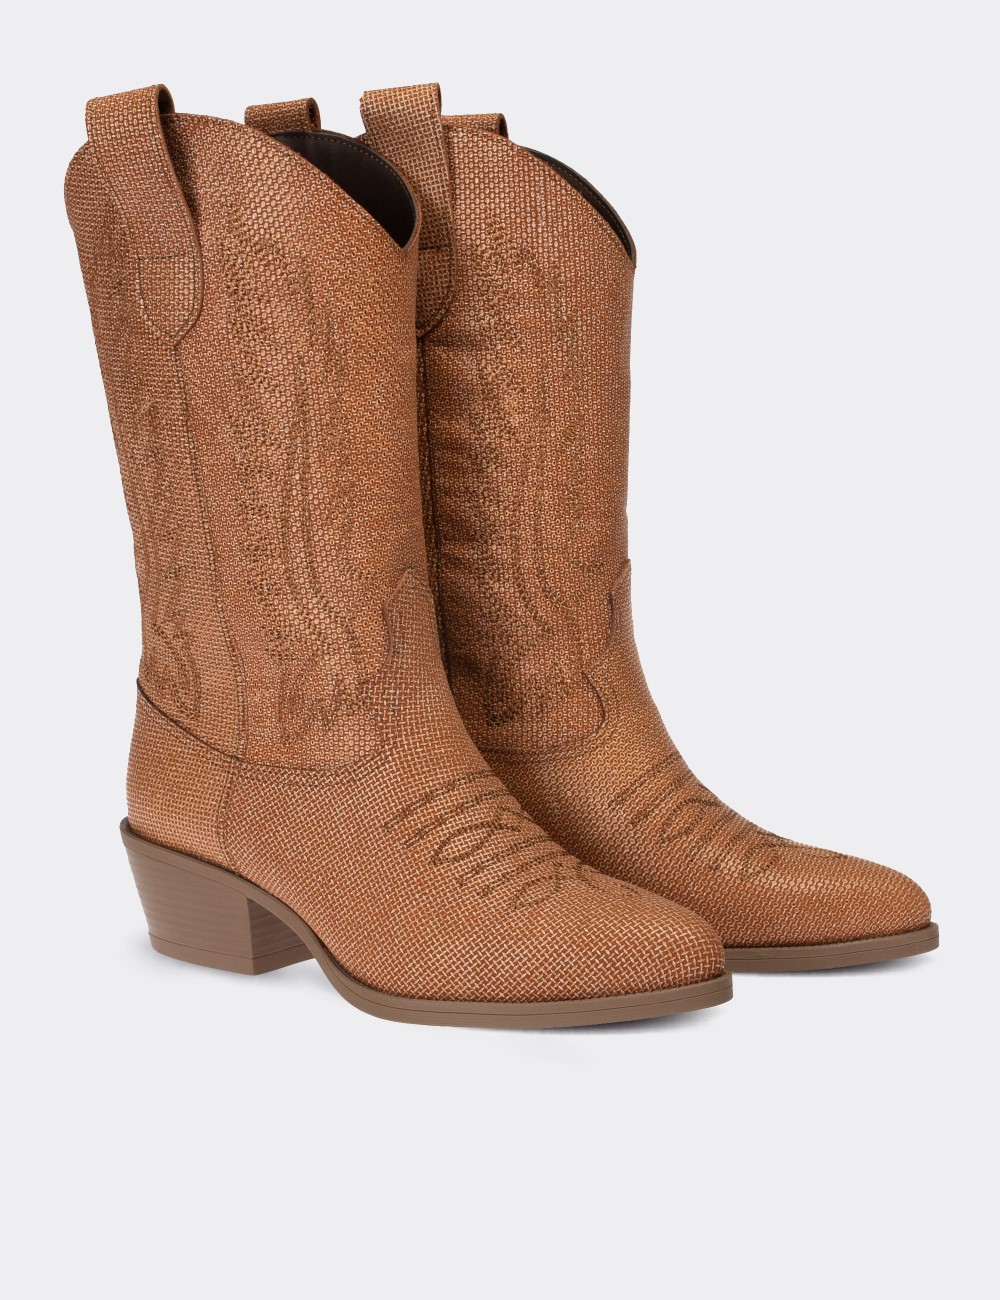 Tan Suede Leather  Boots - E8002ZTBAC01